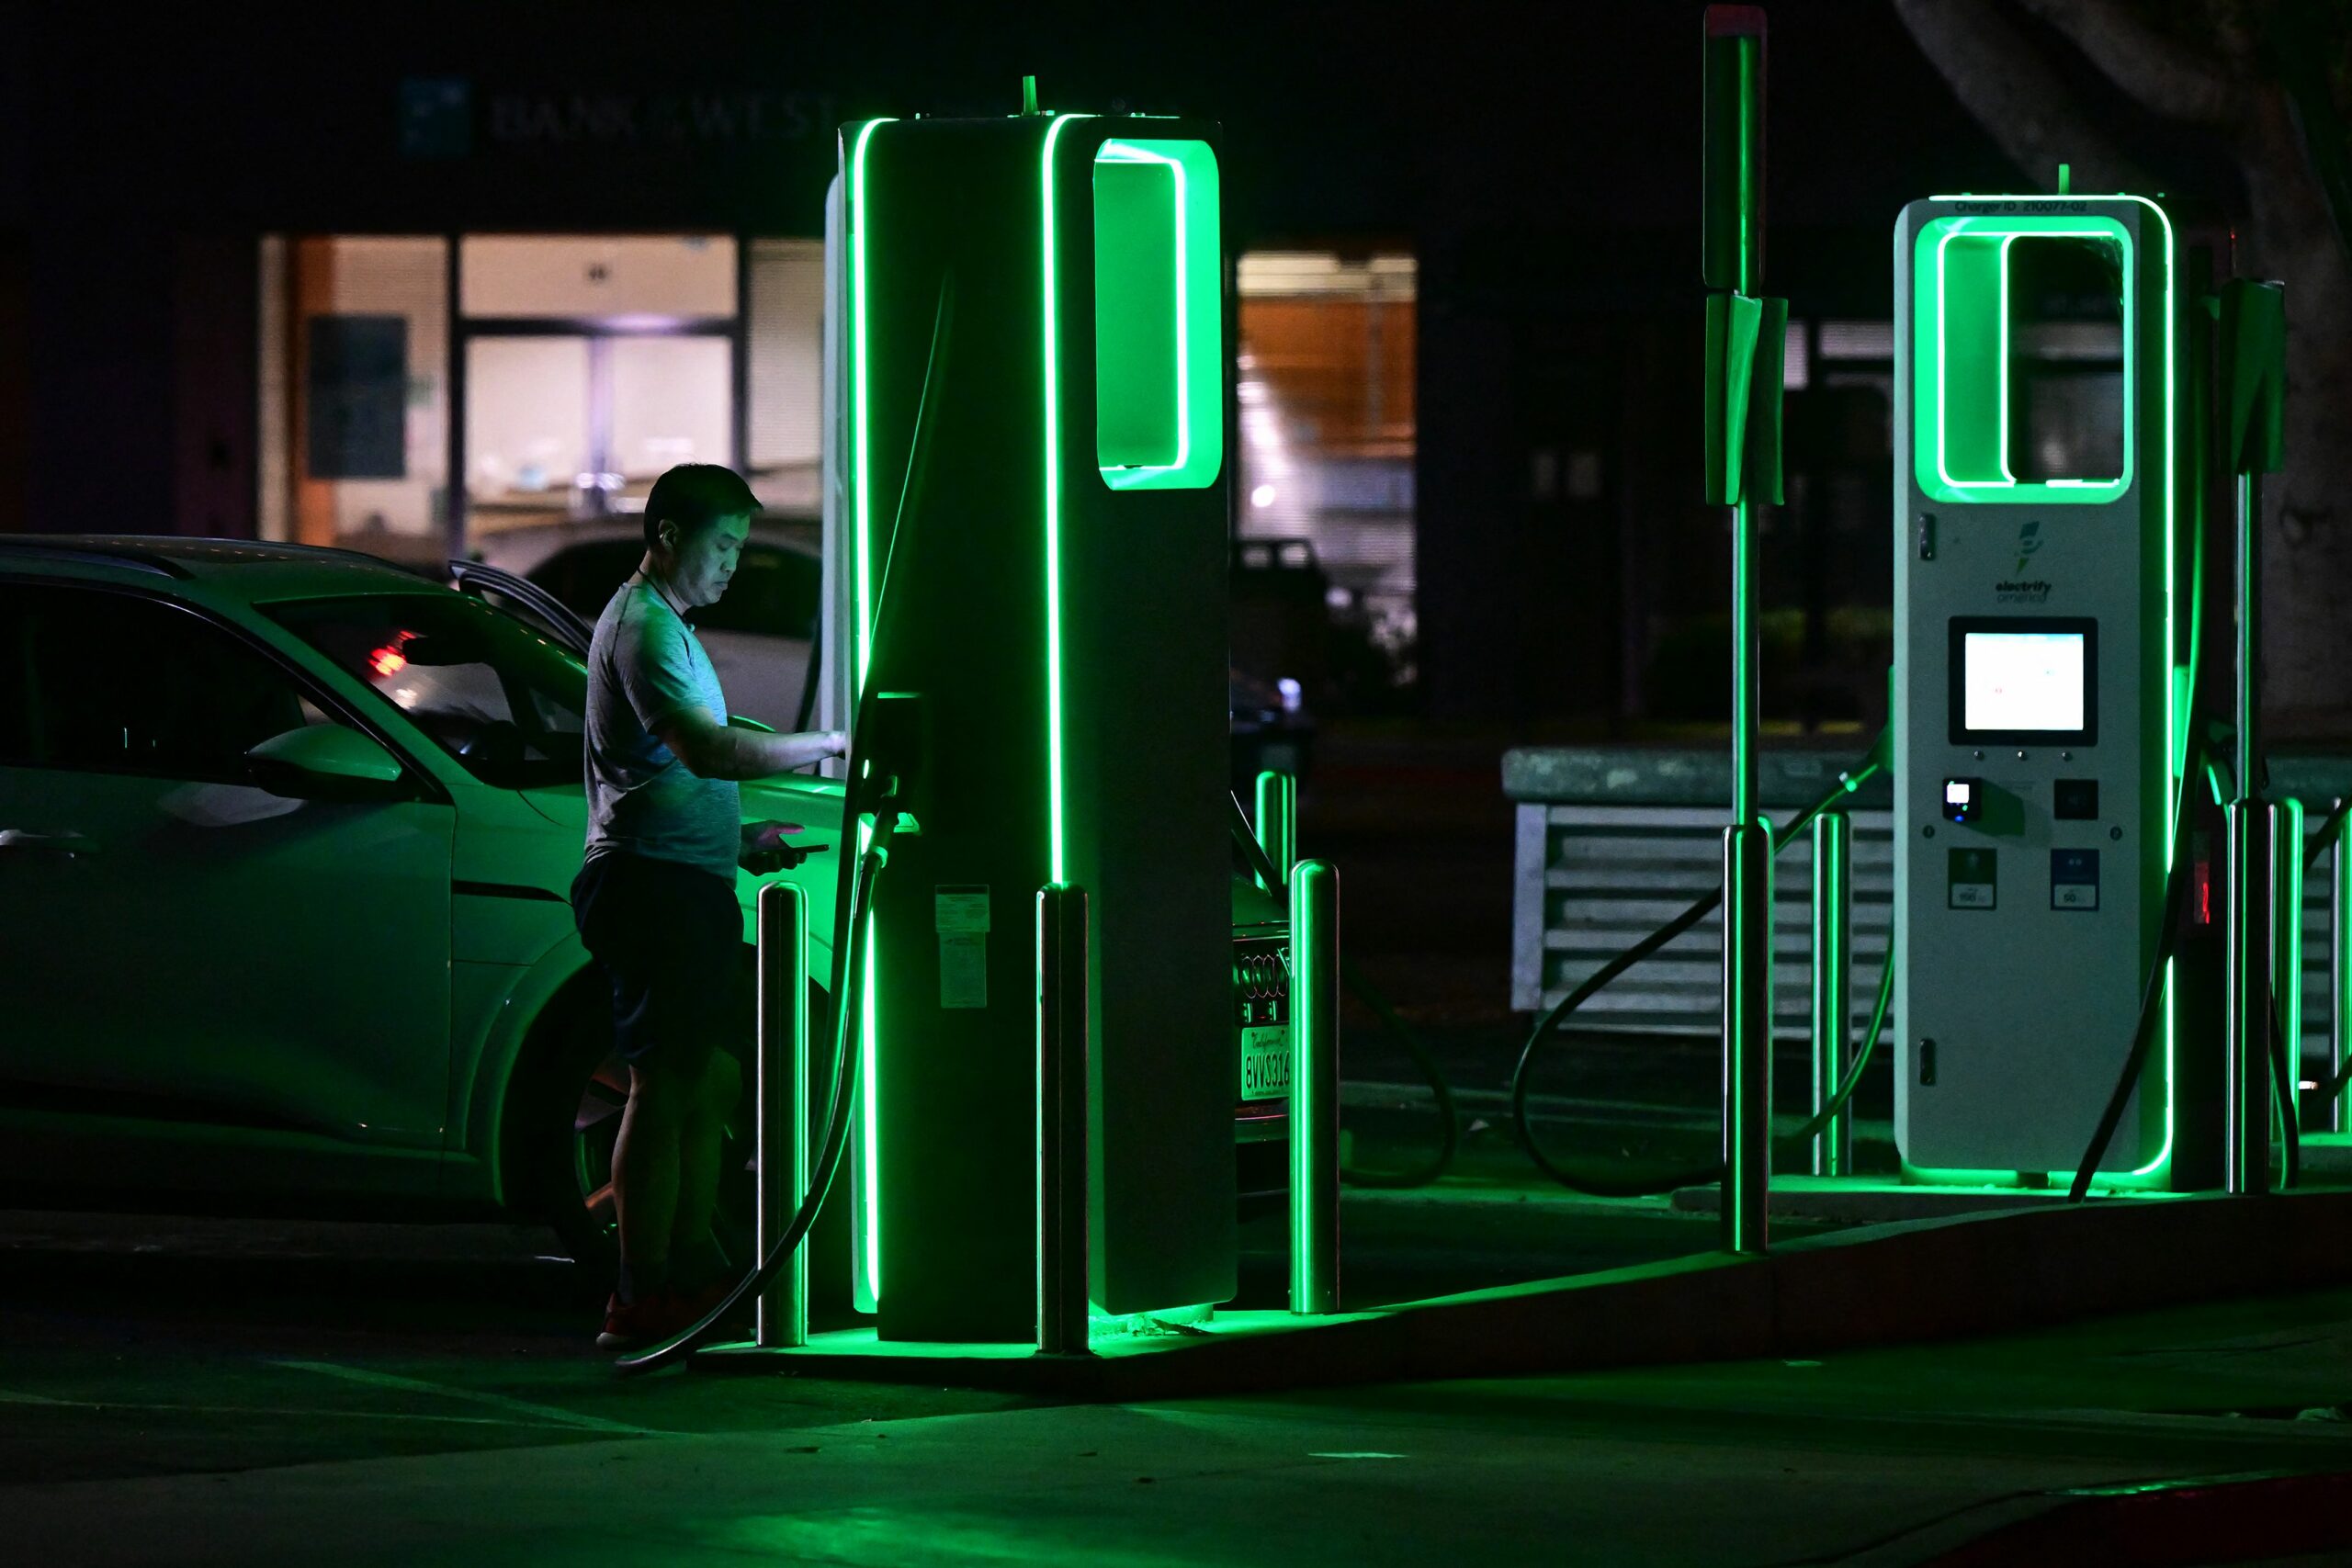 Congress spent billions on EV chargers. But not one has come online.